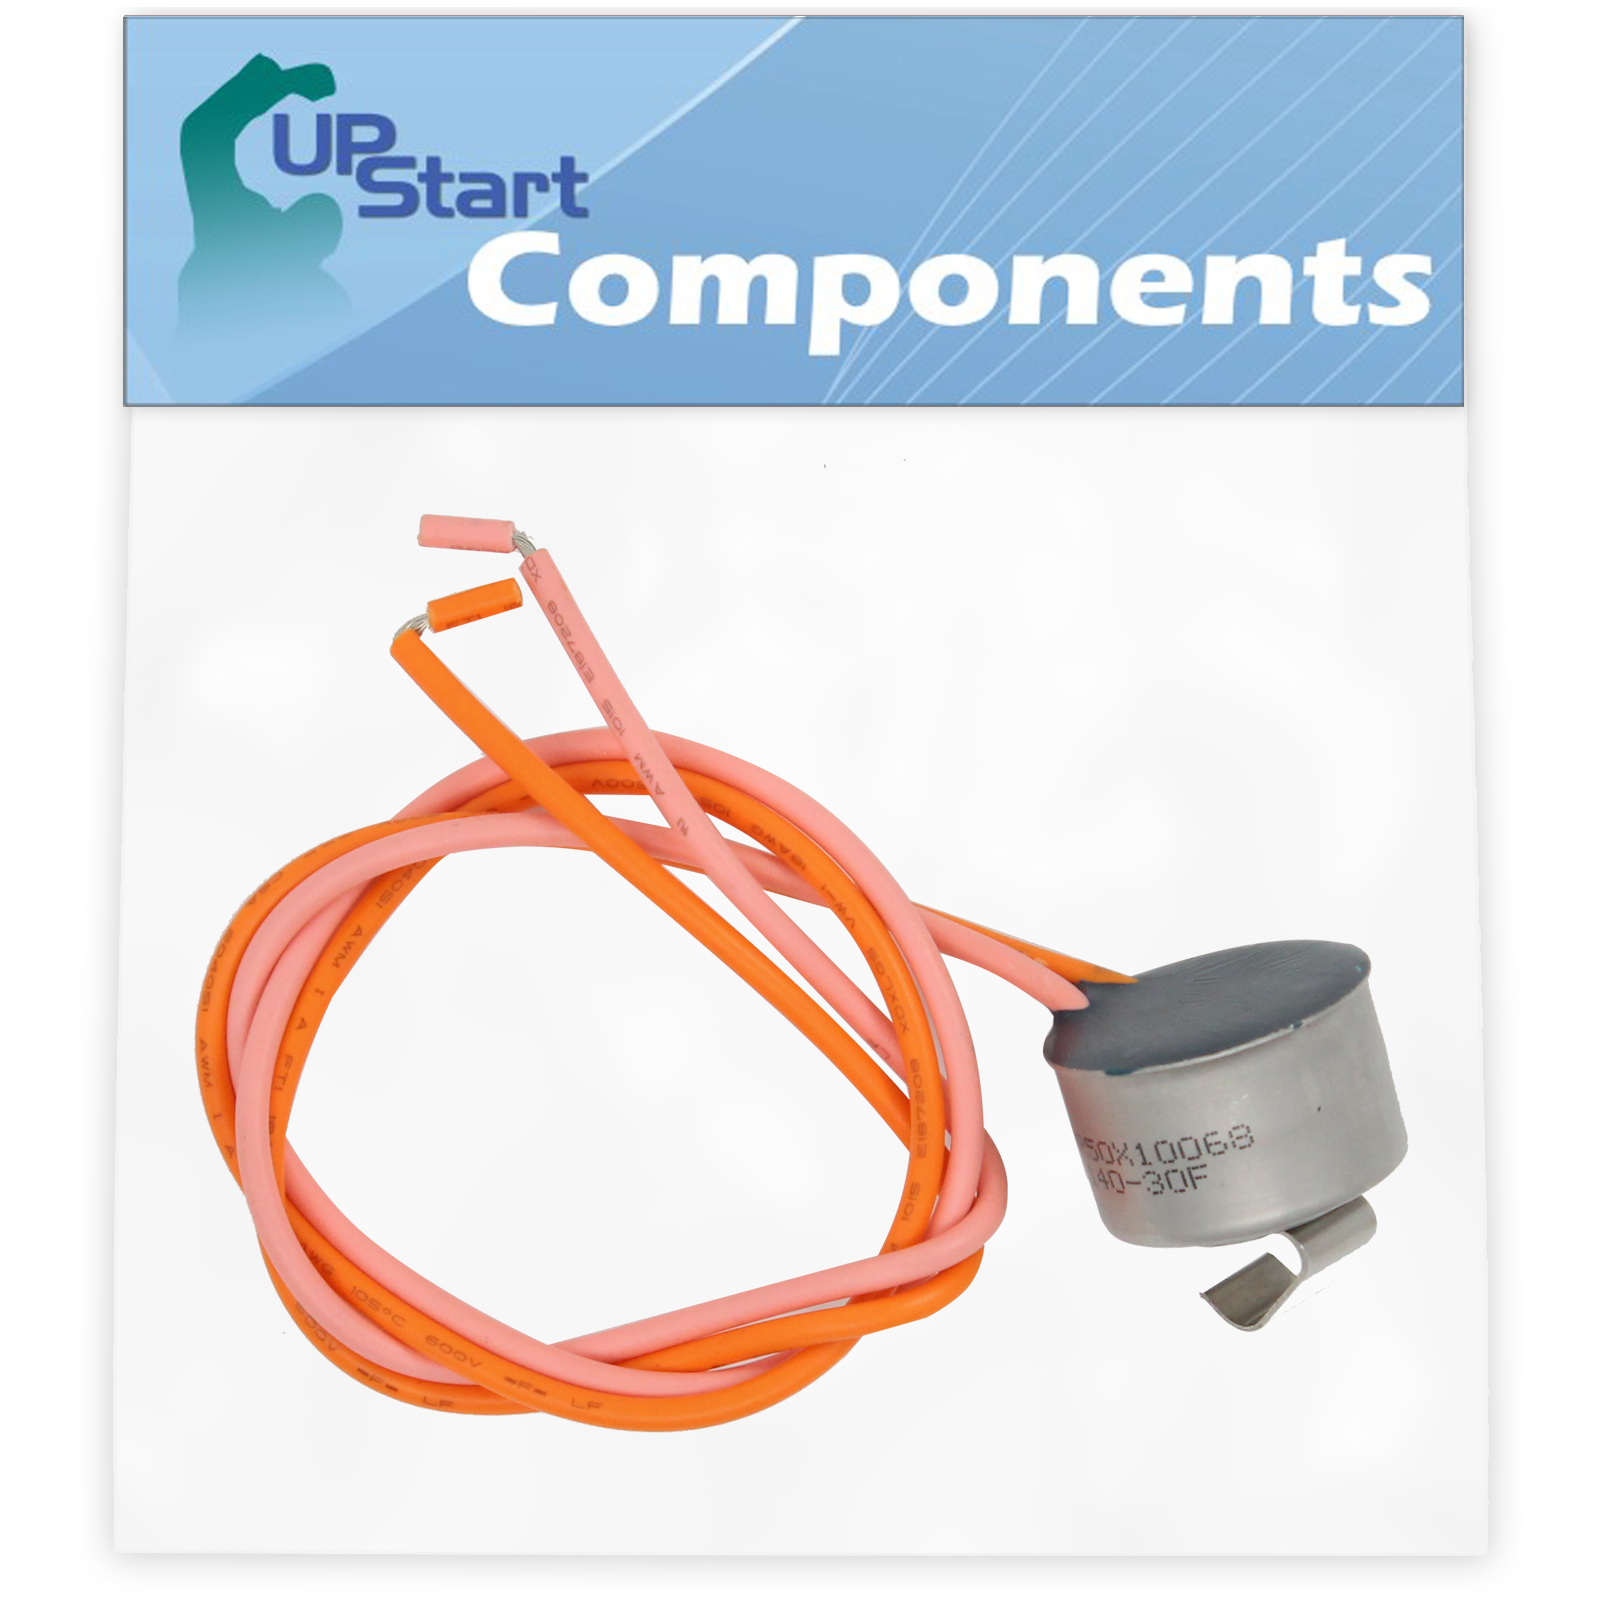 WR50X10068 Defrost Thermostat Replacement for General Electric ZFSB23DNDSS Refrigerator - Compatible with WR50X10068 Defrost Limiter Thermostat - UpStart Components Brand - image 1 of 2